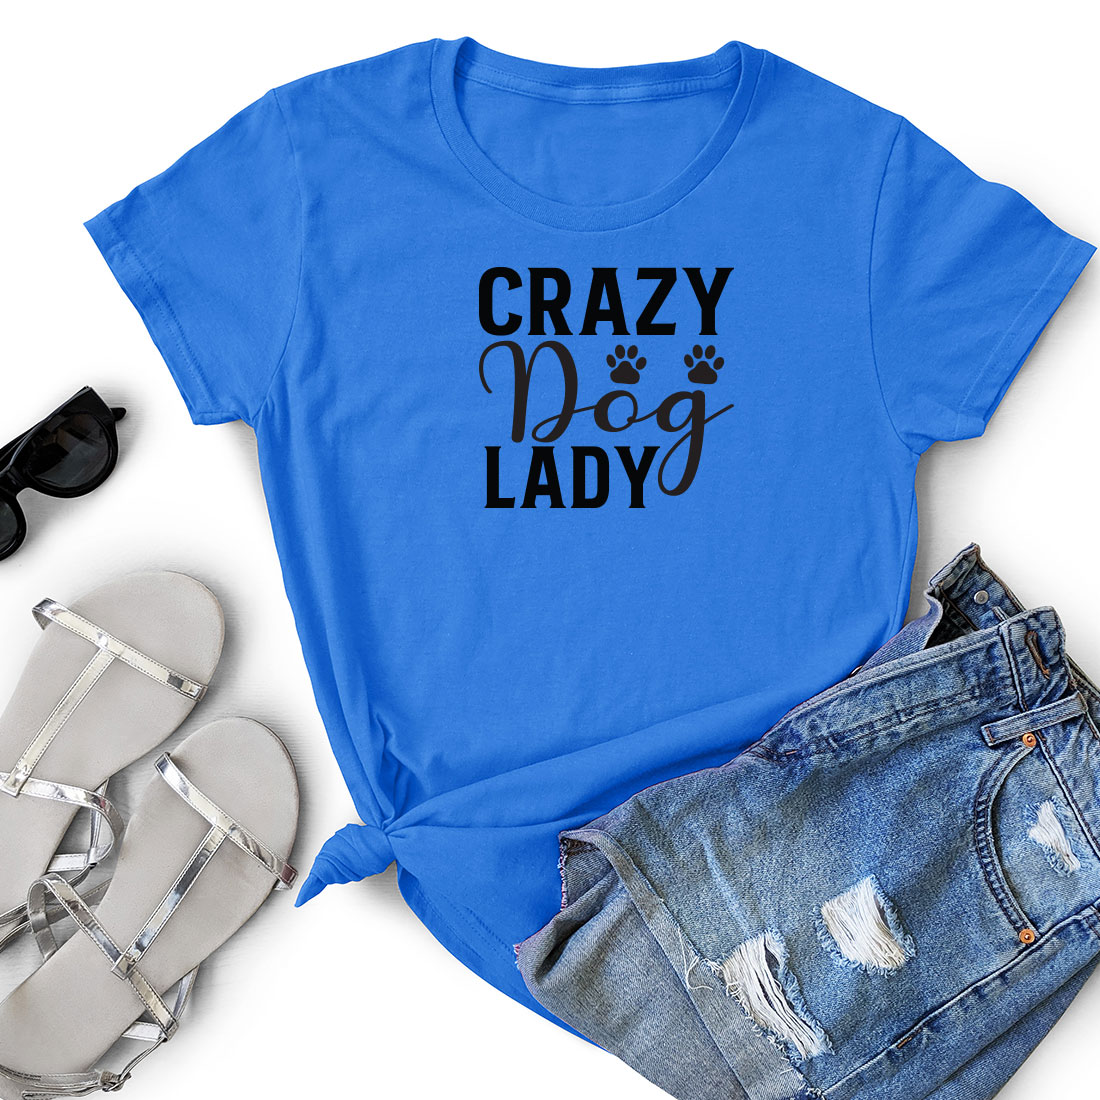 T - shirt that says crazy dog lady next to a pair of shorts.